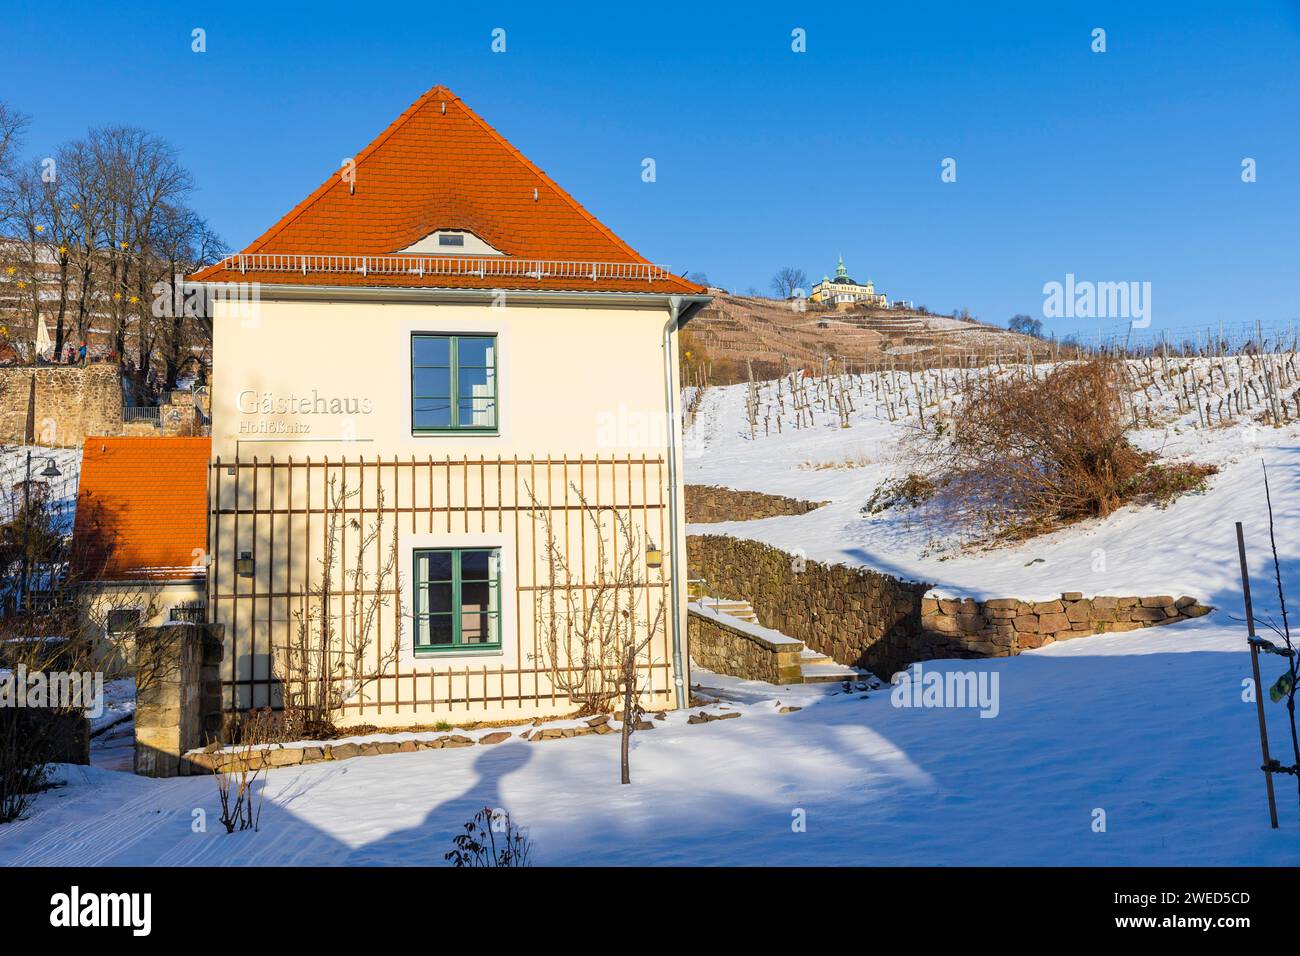 The Hoefloessnitz winery is also a popular destination in winter. Hofloessnitz Guest House, Radebeul, Saxony, Germany Stock Photo